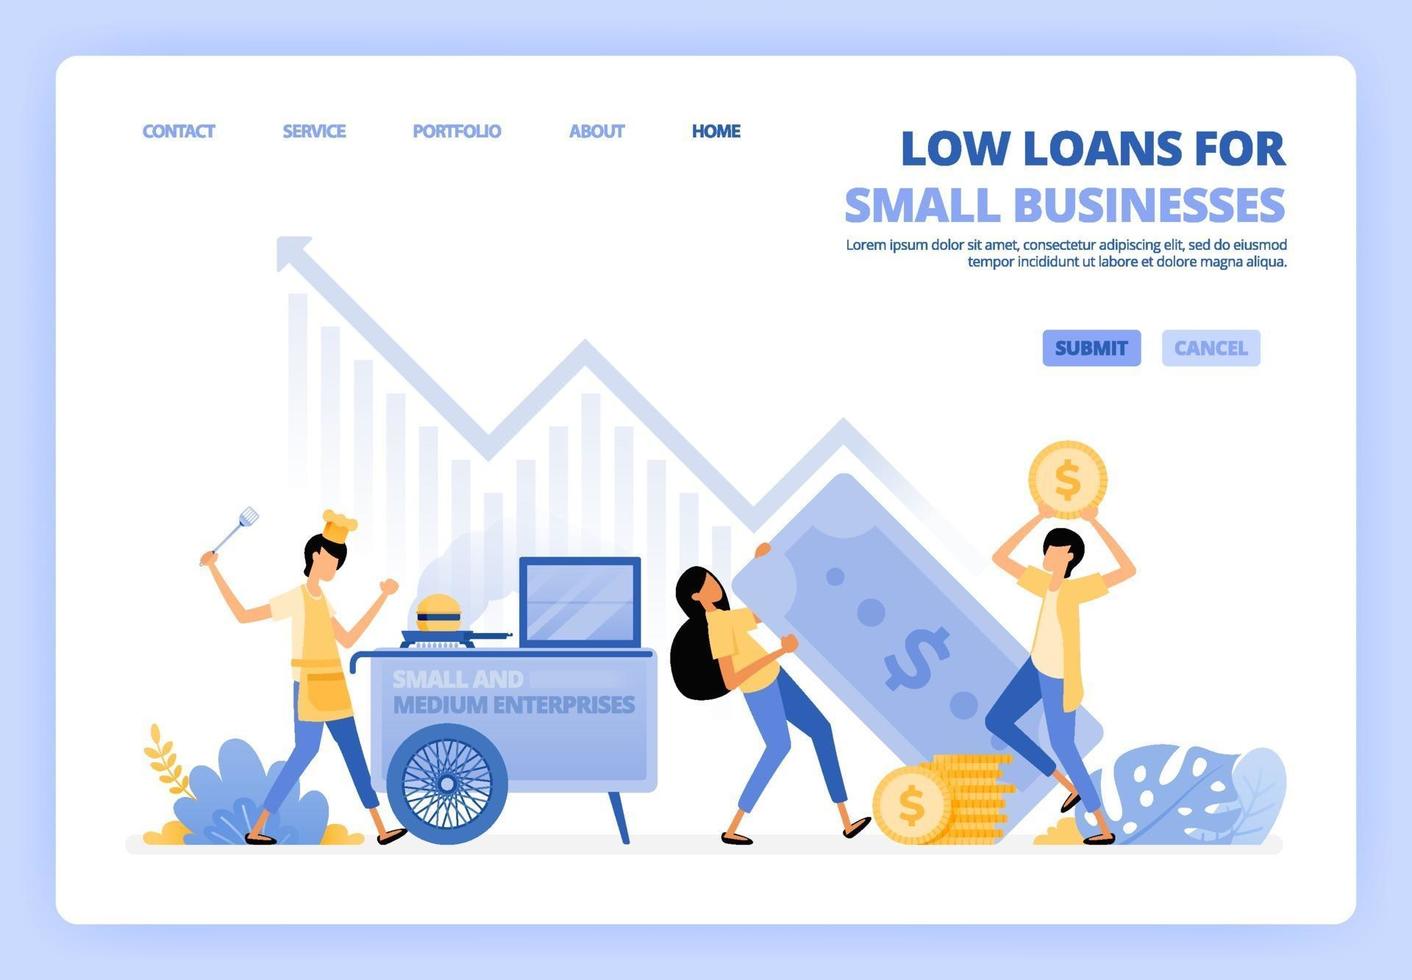 Low interest loans for startups, street vendors, small businesses. Debt funding help develop small companies. Can be used for landing page template ui ux web mobile app poster banner website flyer ads vector